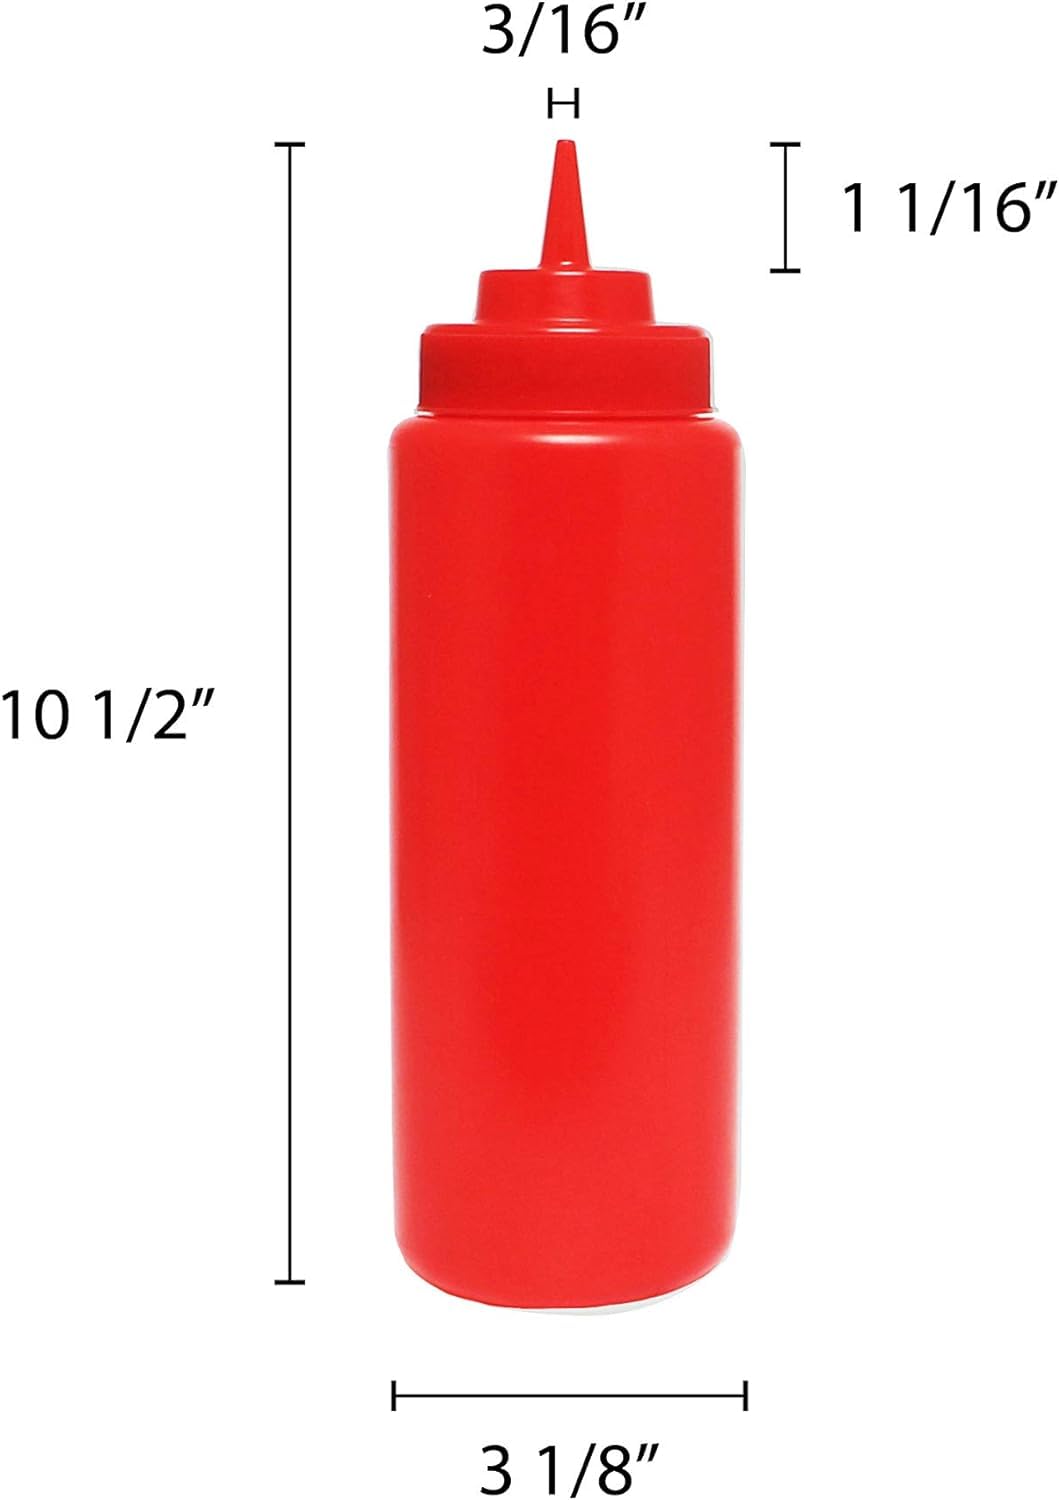 TrueCraftware-Set of 6 Squeeze Condiment Wide Mouth Dispensing Bottles 32 oz Red- Plastic Squeeze Bottle For Sauces Spreads Ketchup Mustard Mayo Hot sauces and Olive oil